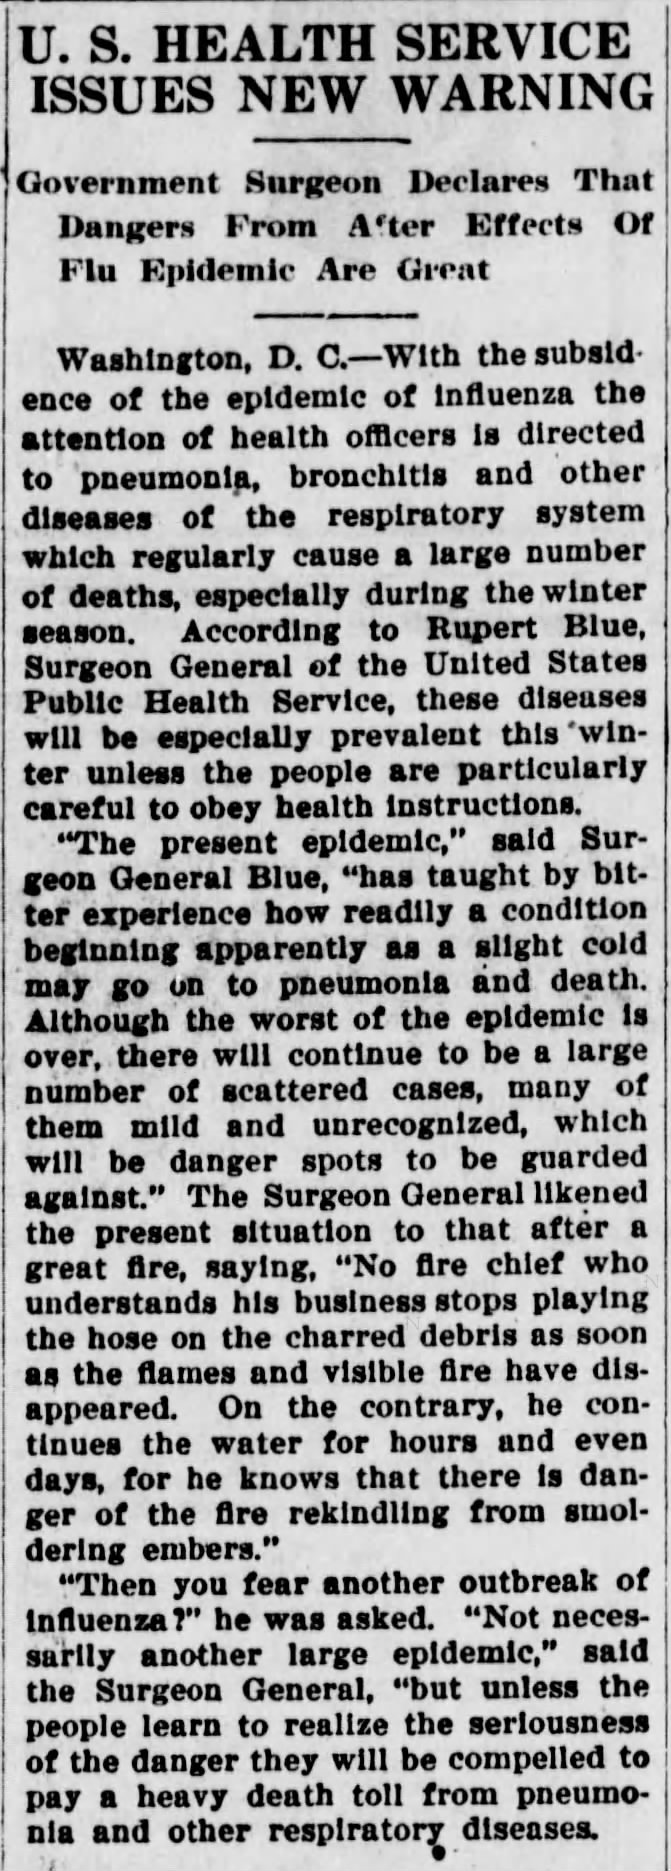 "Government surgeon declares that dangers from after effects of flu epidemic are great"